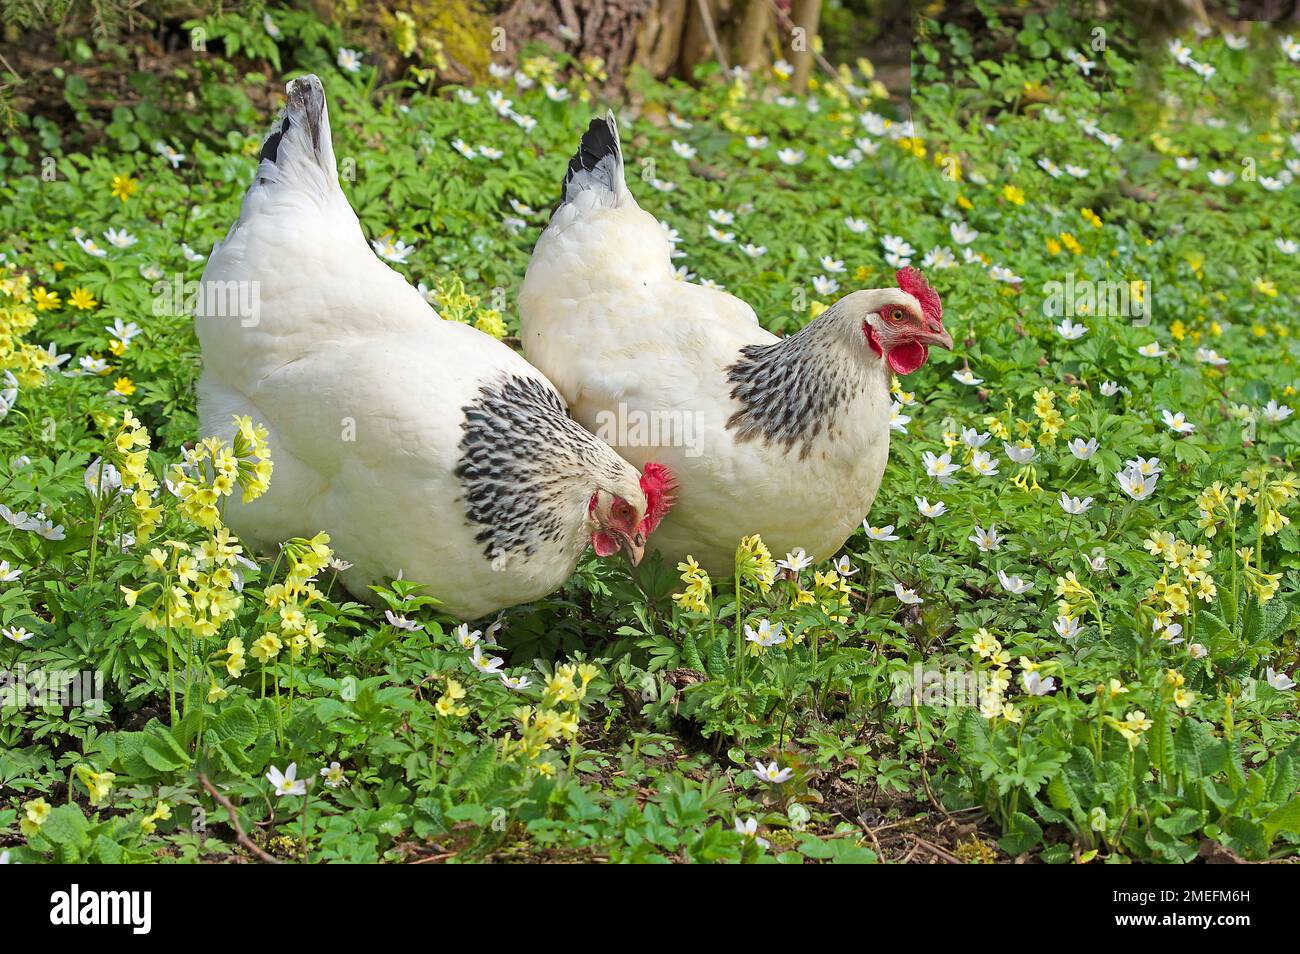 Two Sussex hens in spring meadow, oxlips and wood anemones. Stock Photo